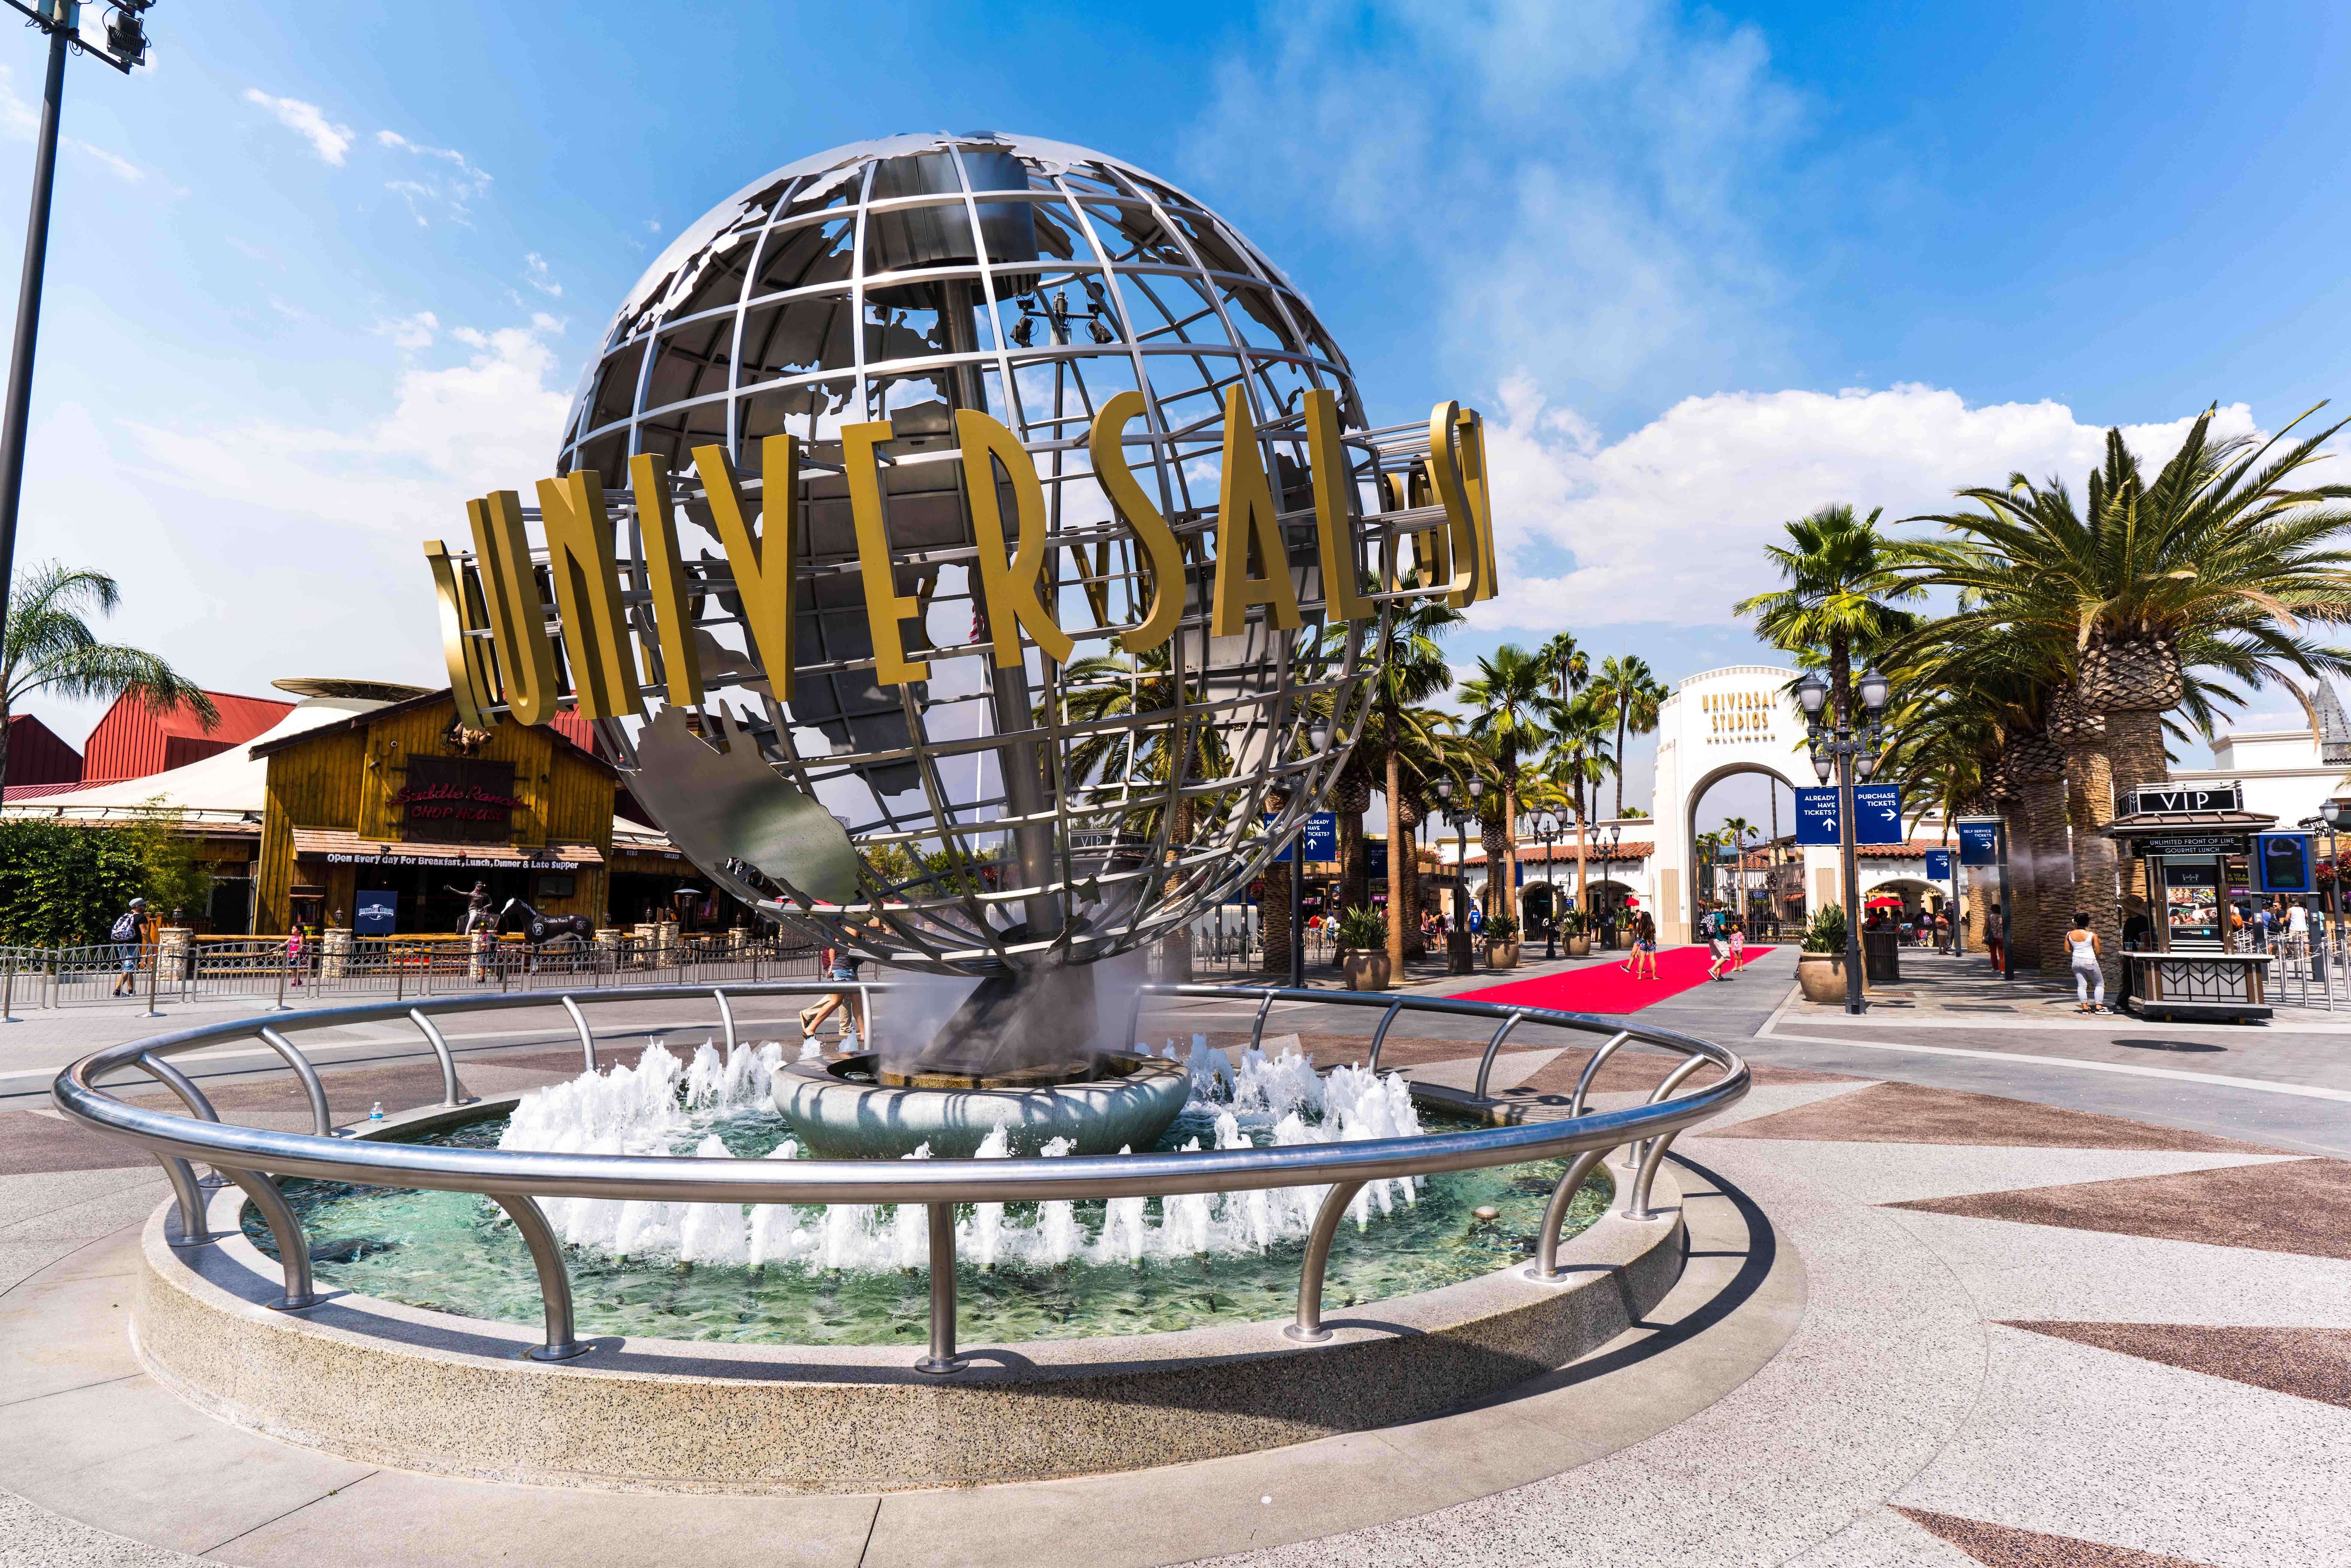 Universal Studios Hollywood globe fountain structure